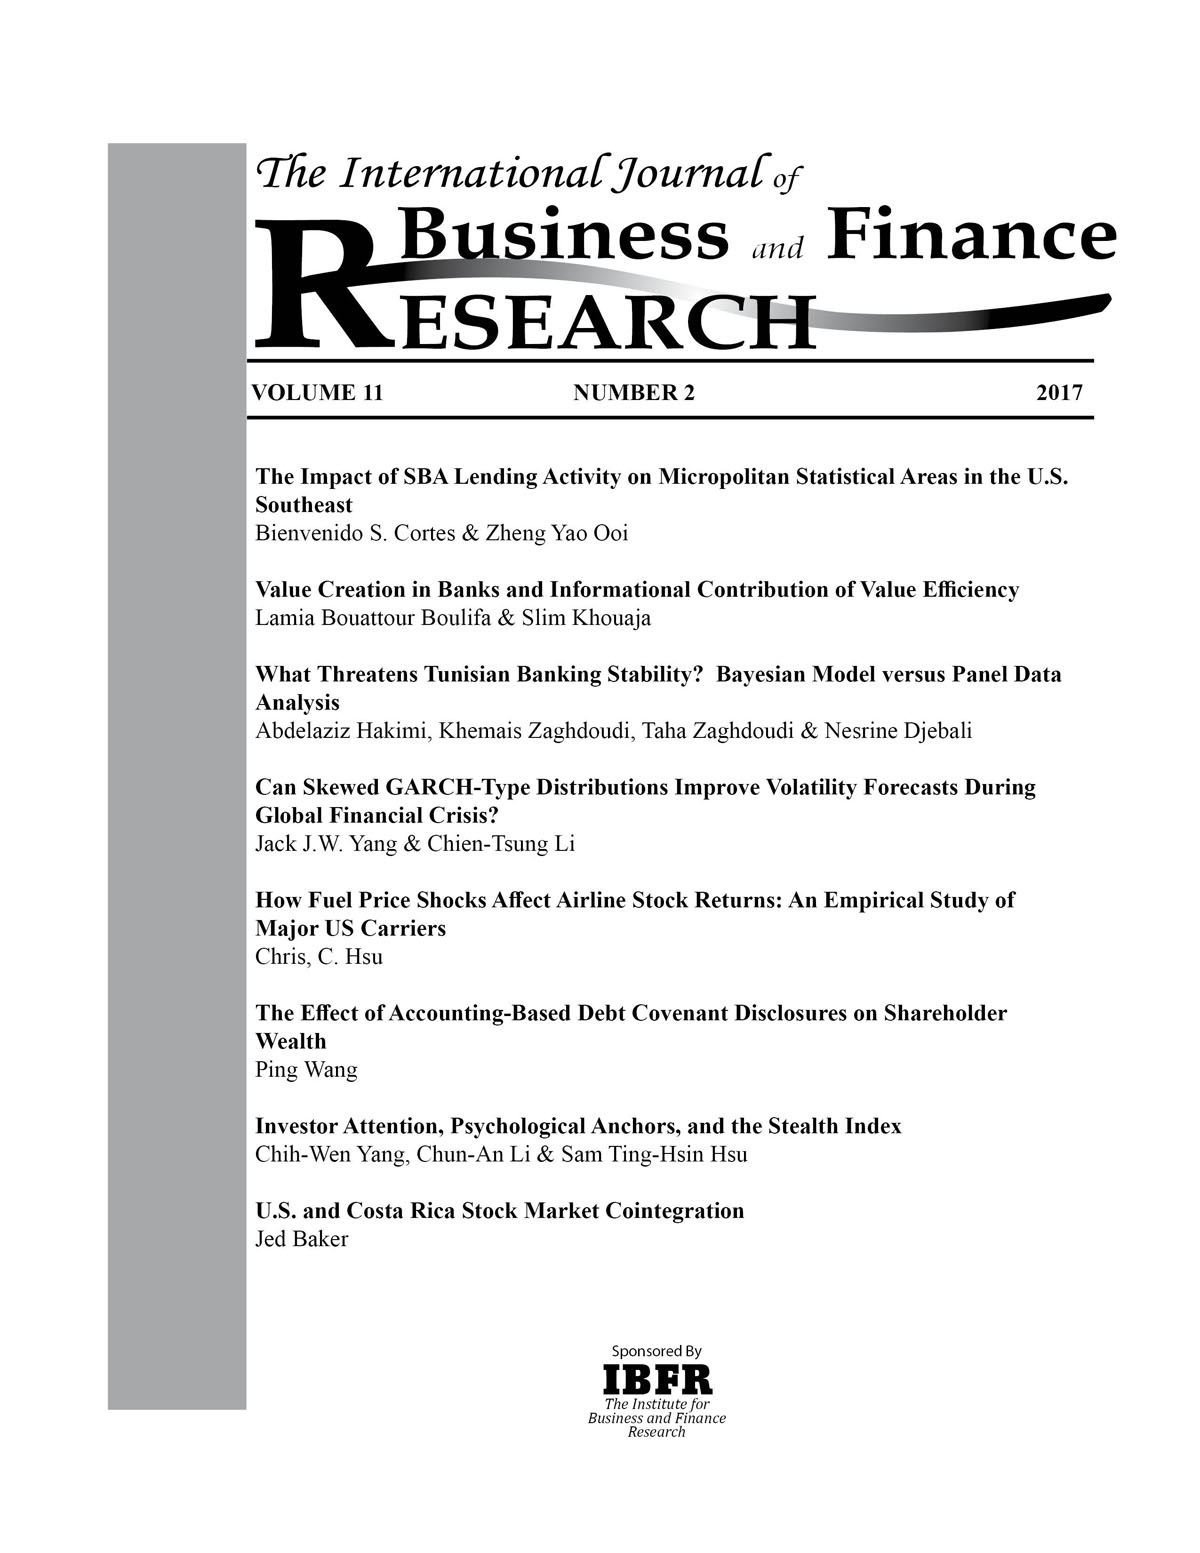 research paper on international finance